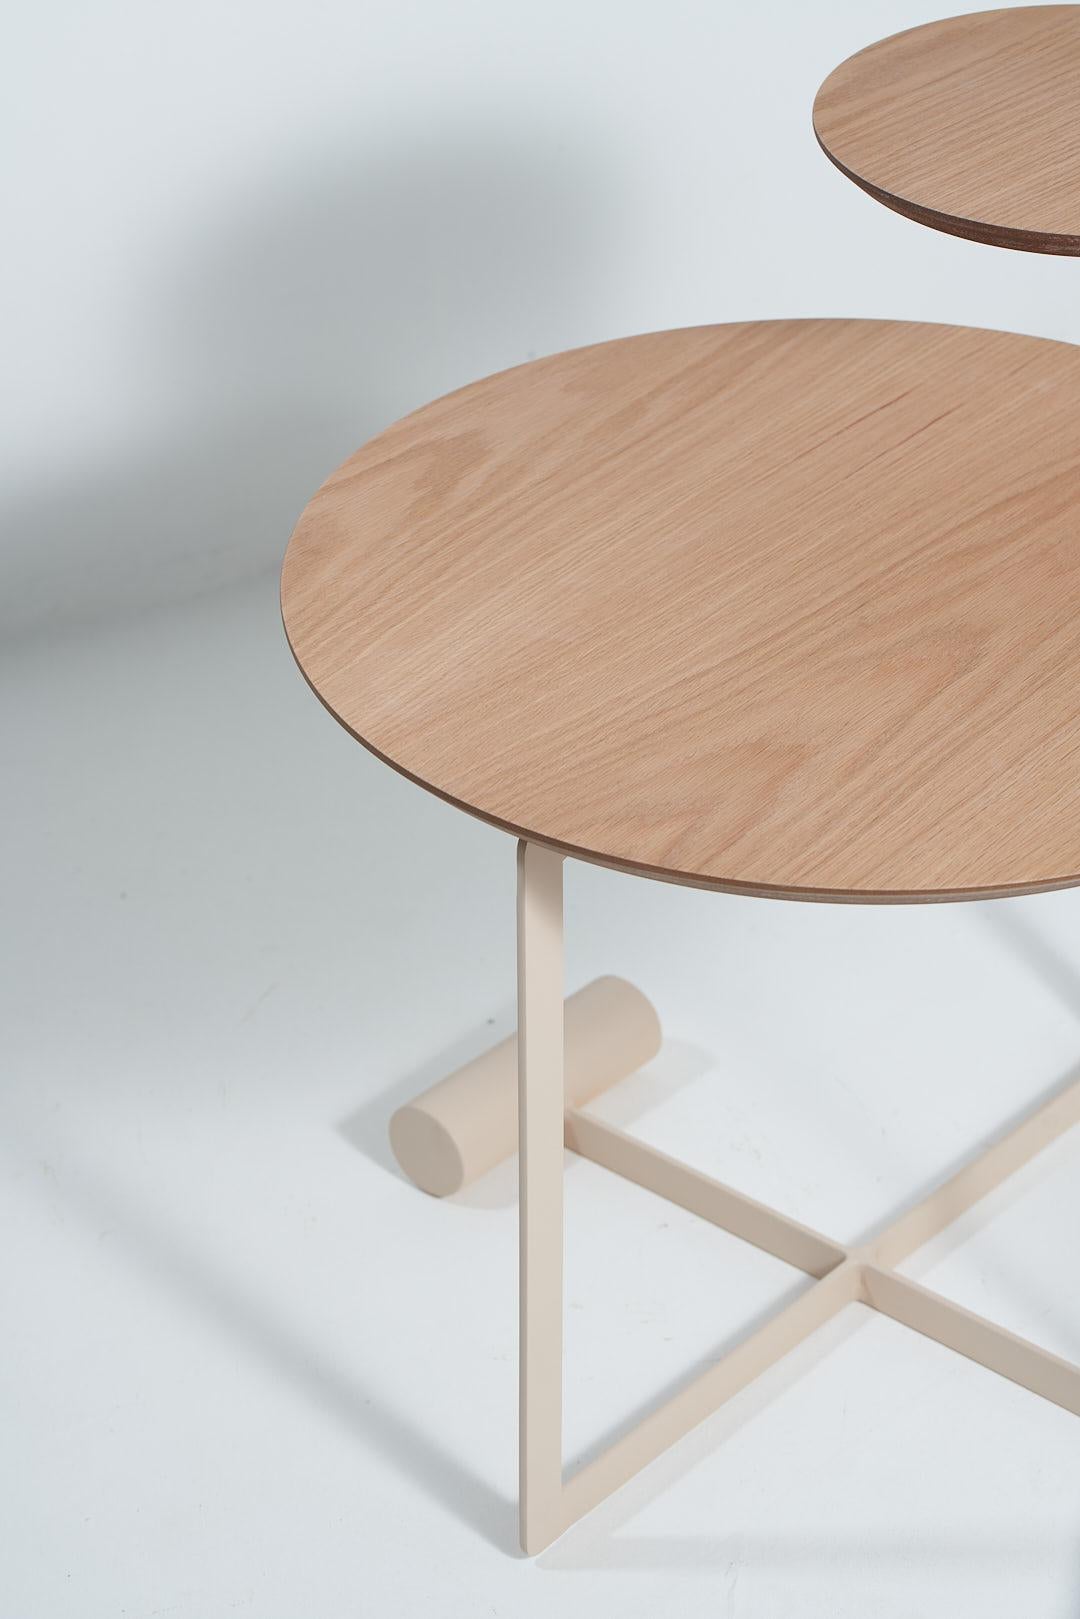 Sense Collection, Wood and Steel American Oak Side Table In New Condition For Sale In Belo Horizonte, Minas Gerais